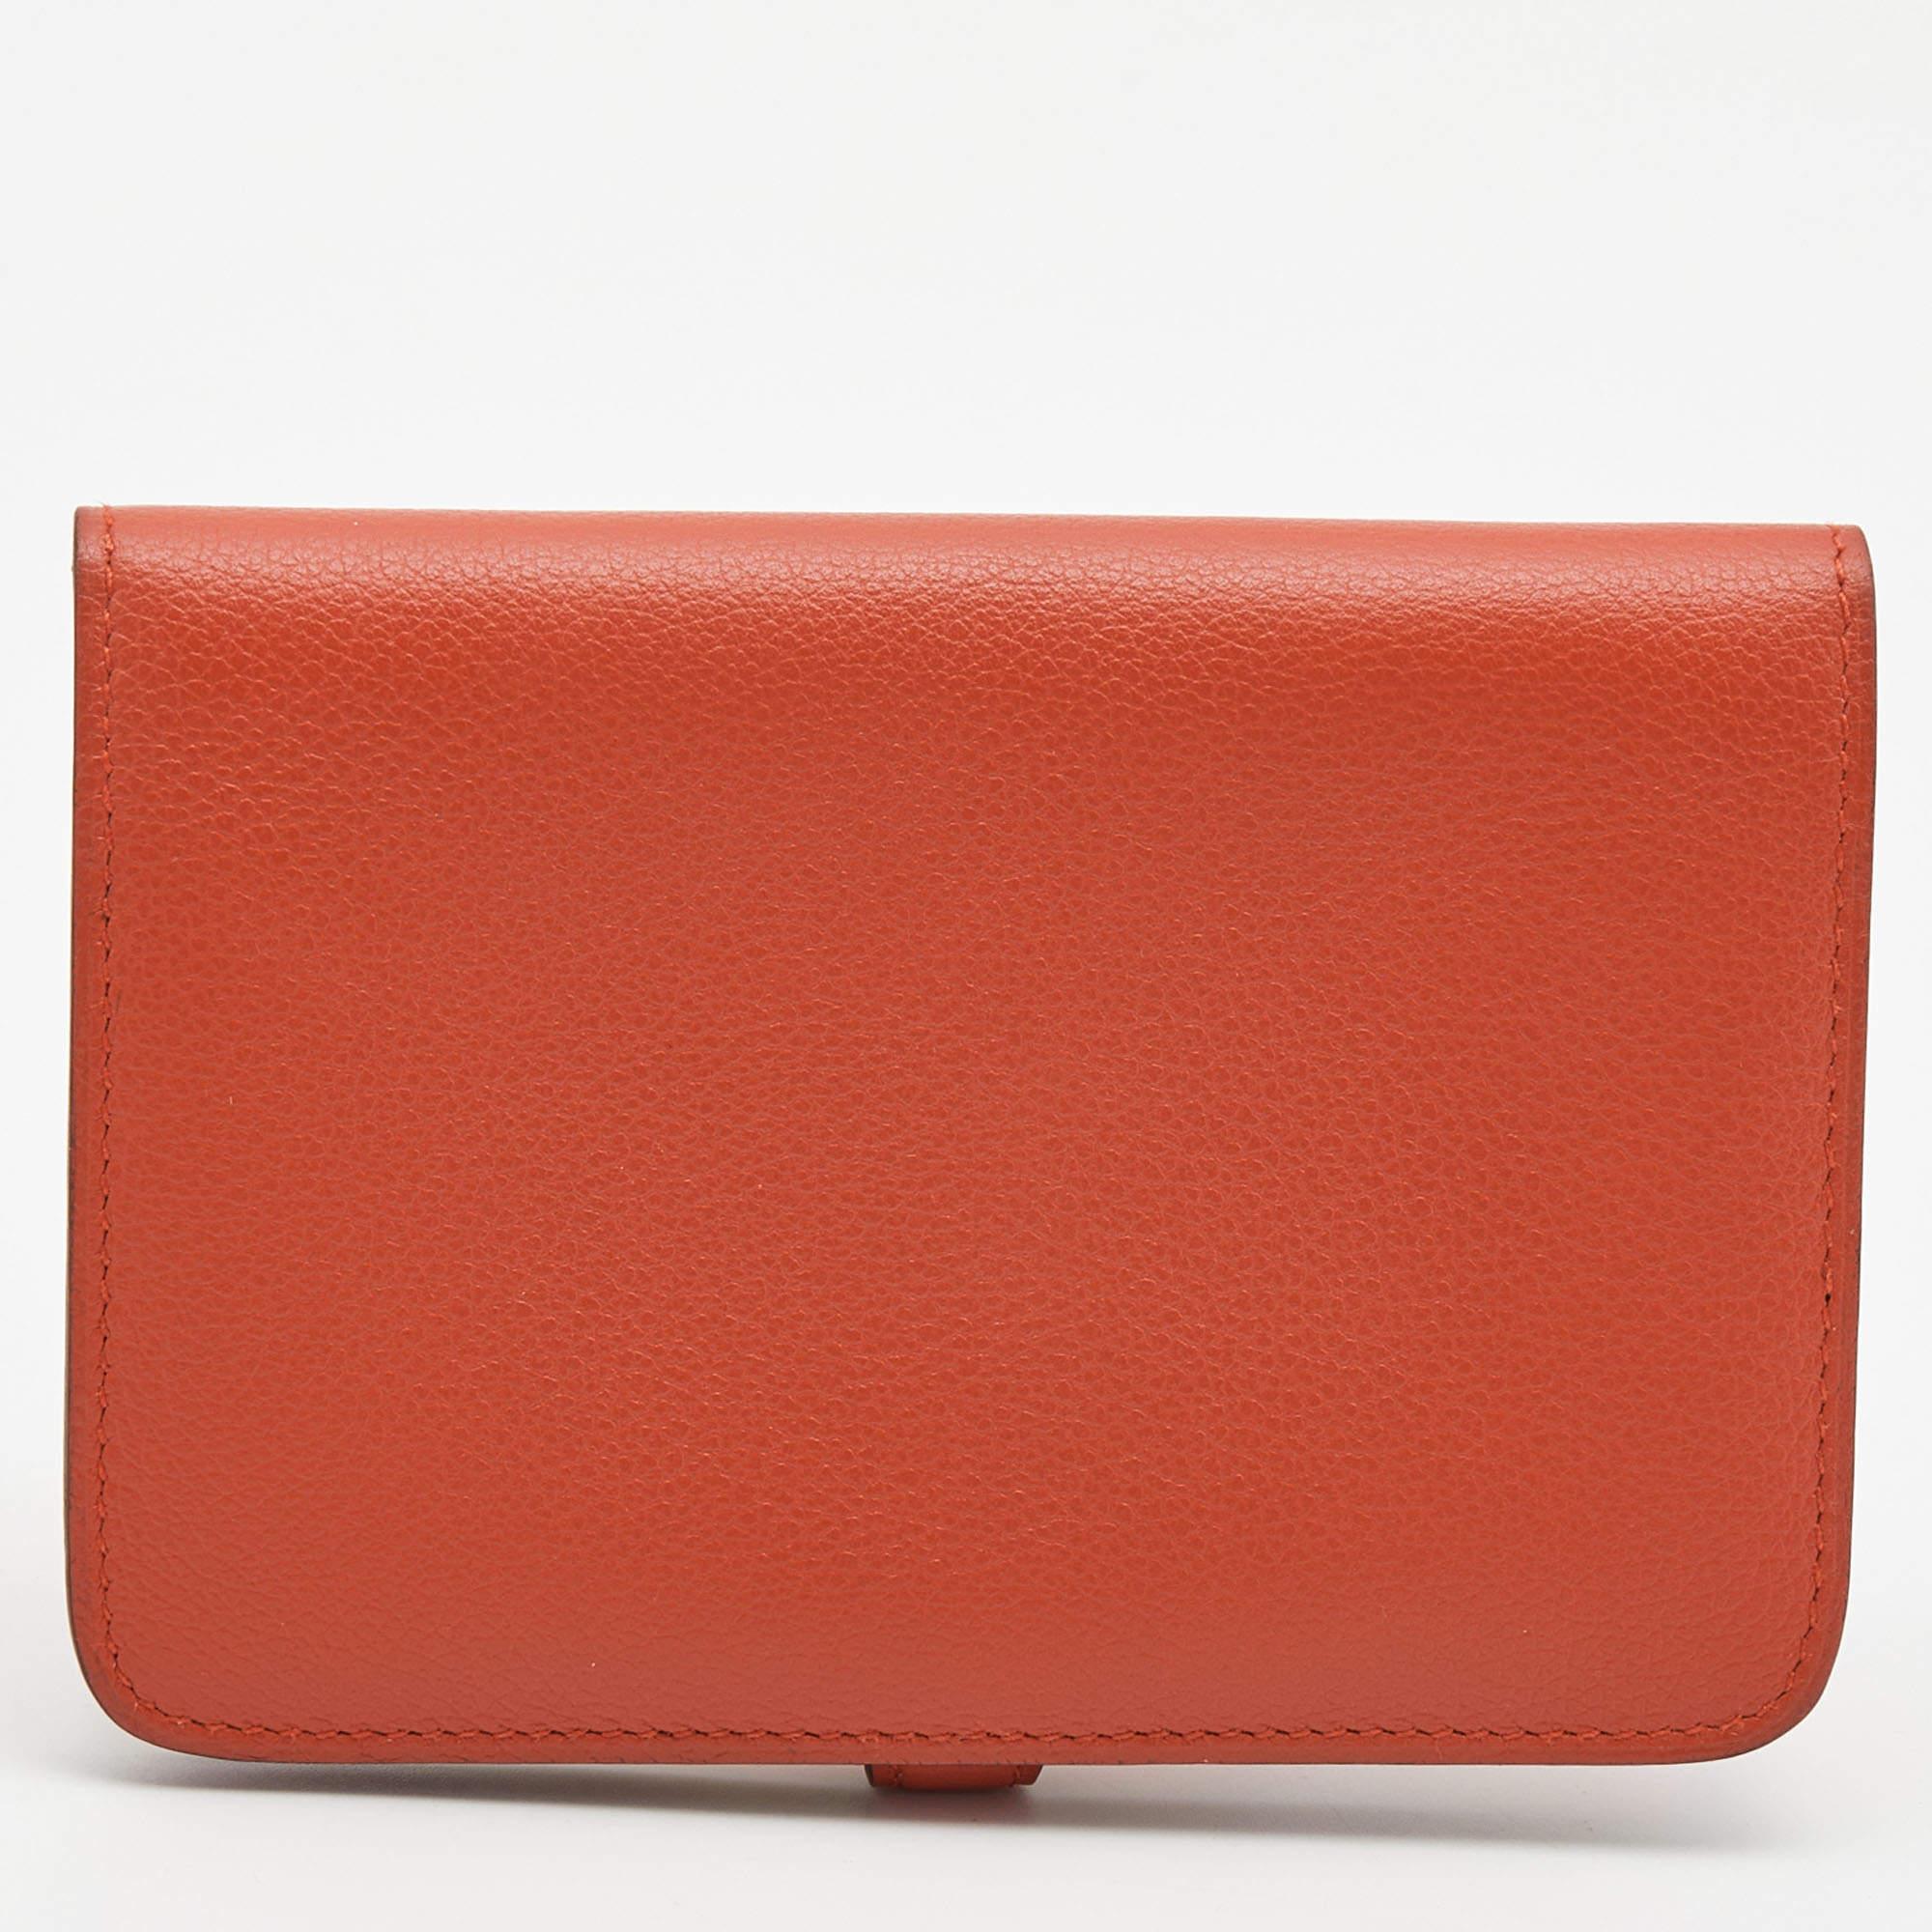 A beautiful wallet for stylish women, this Hermes wallet is perfect to be carried solo or inside your tote while you step out to run errands. It is a durable accessory.

